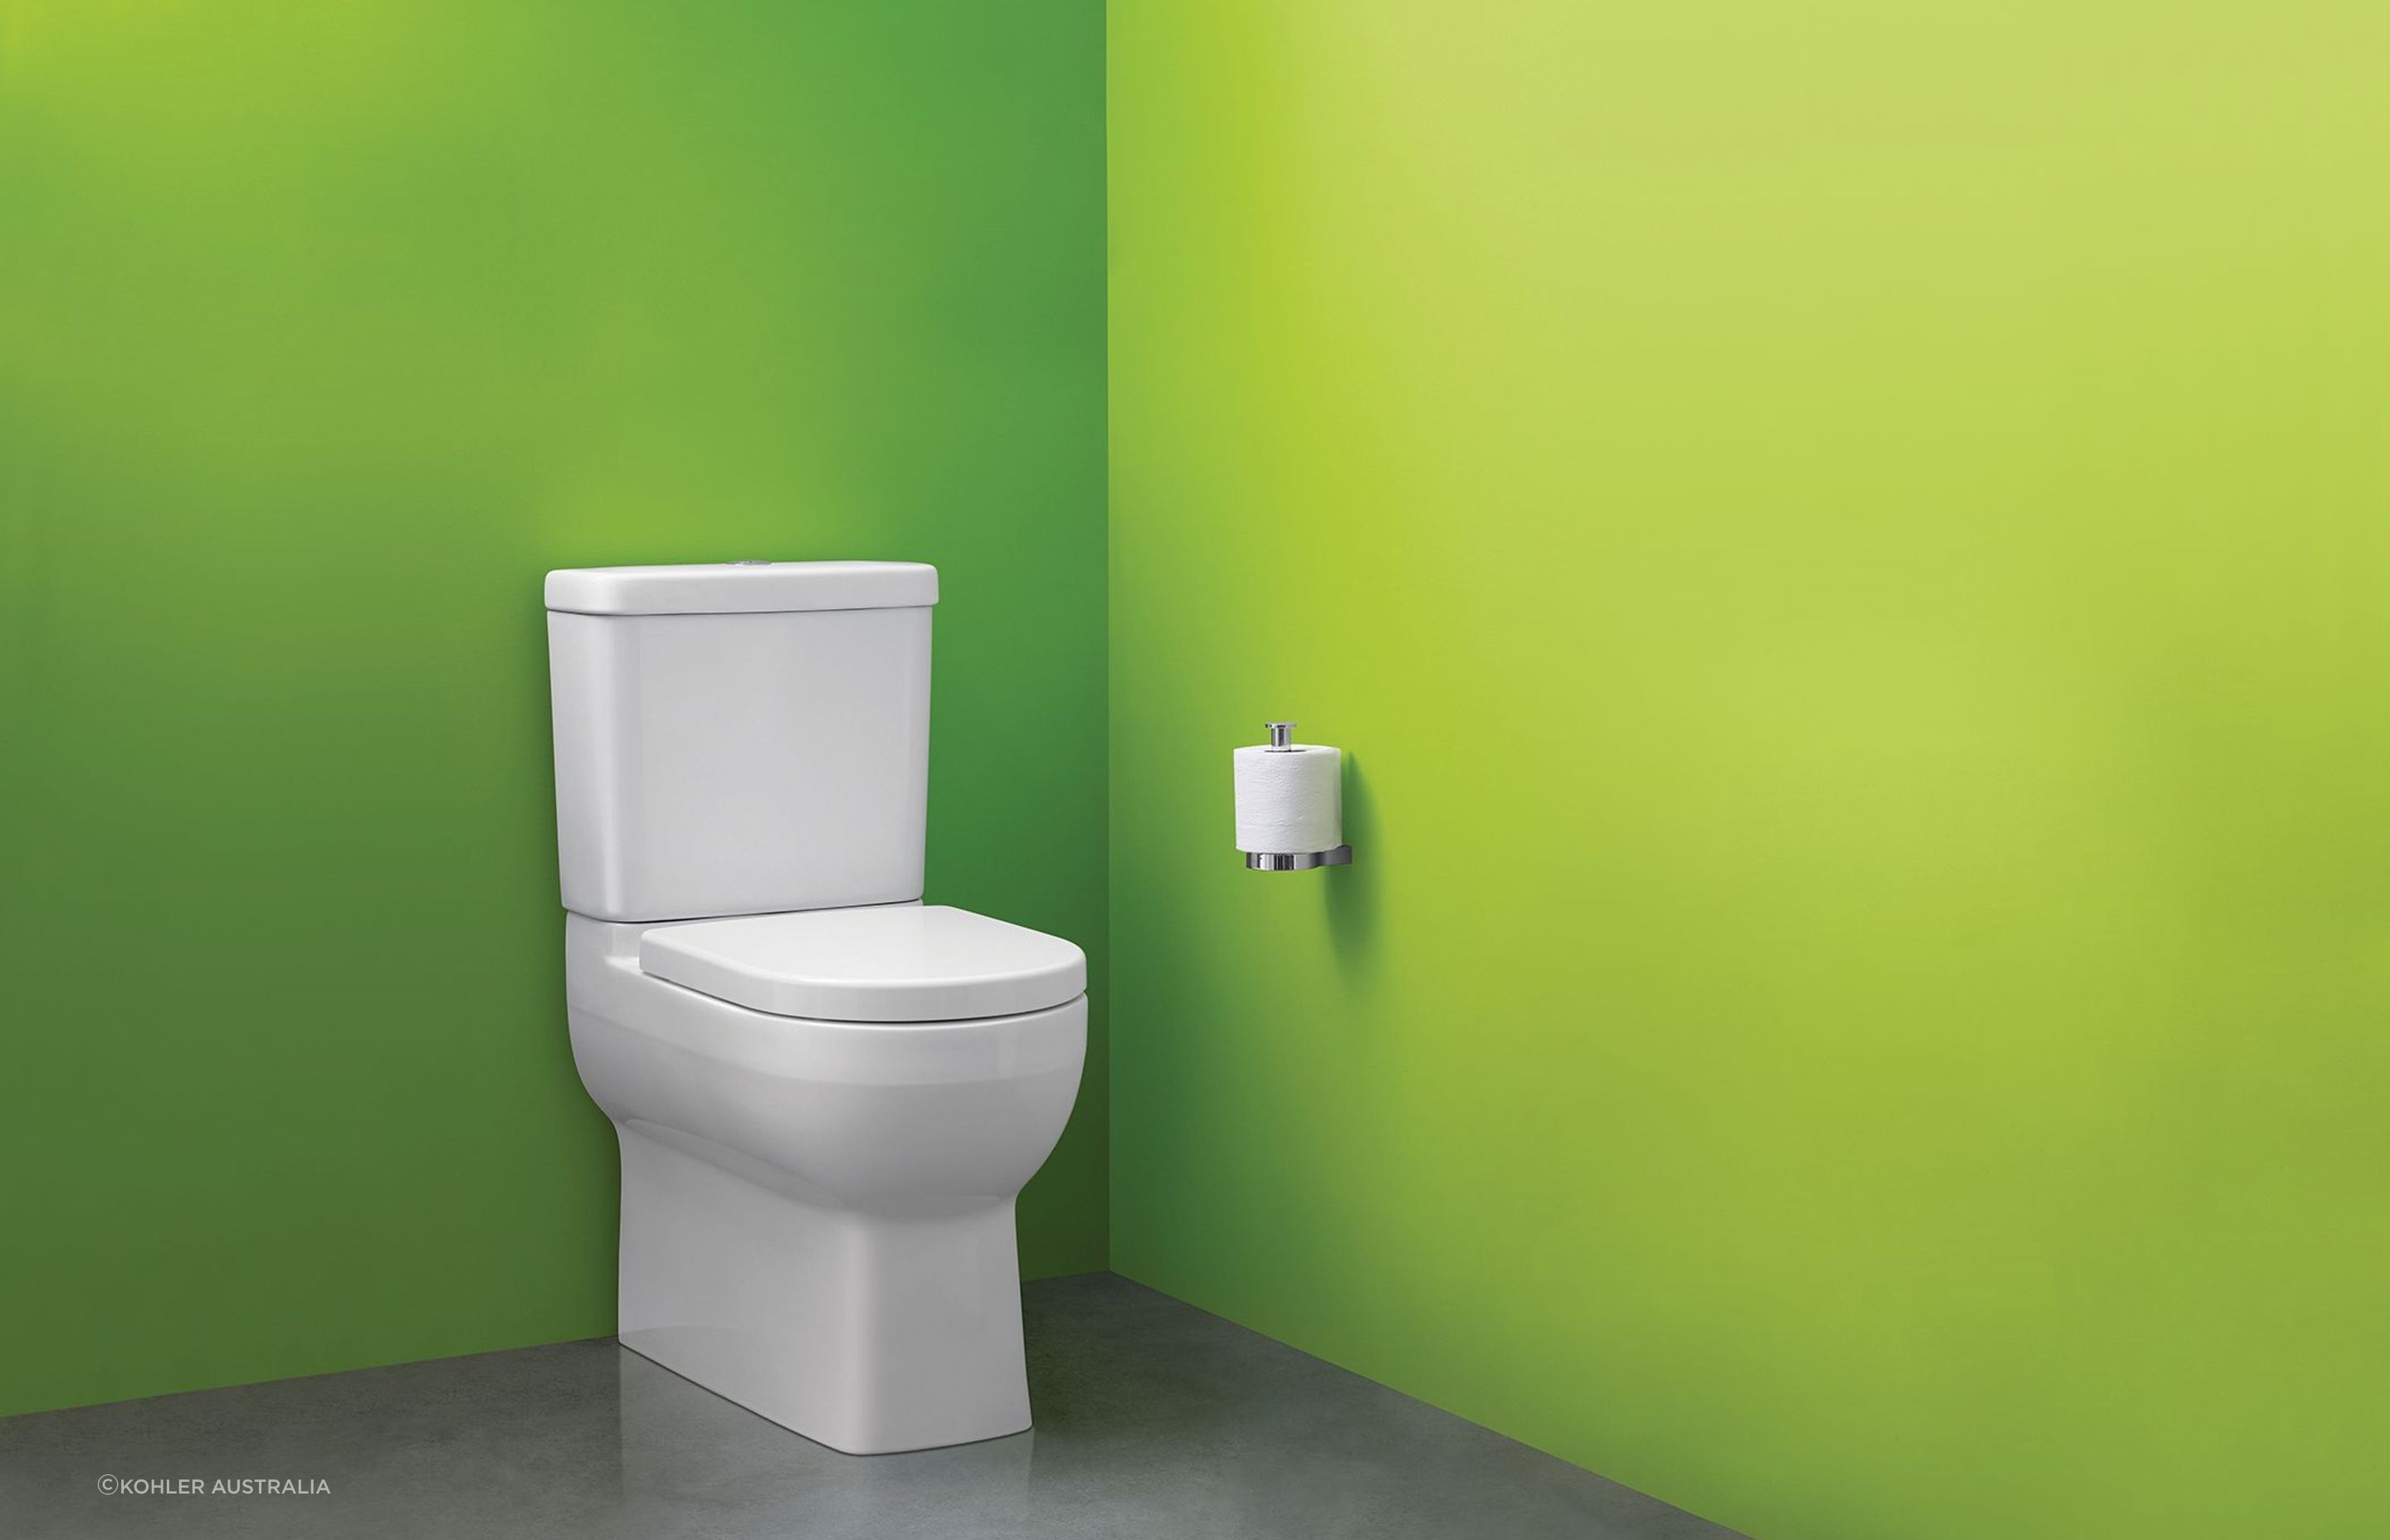 The wall-faced toilet, also known as a back-to-wall toilet, sits flush against the bathroom wall, hiding the plumbing and waste pipes, providing a neat and tidy look. Featured product: Reach Back To Wall Toilet Suite.